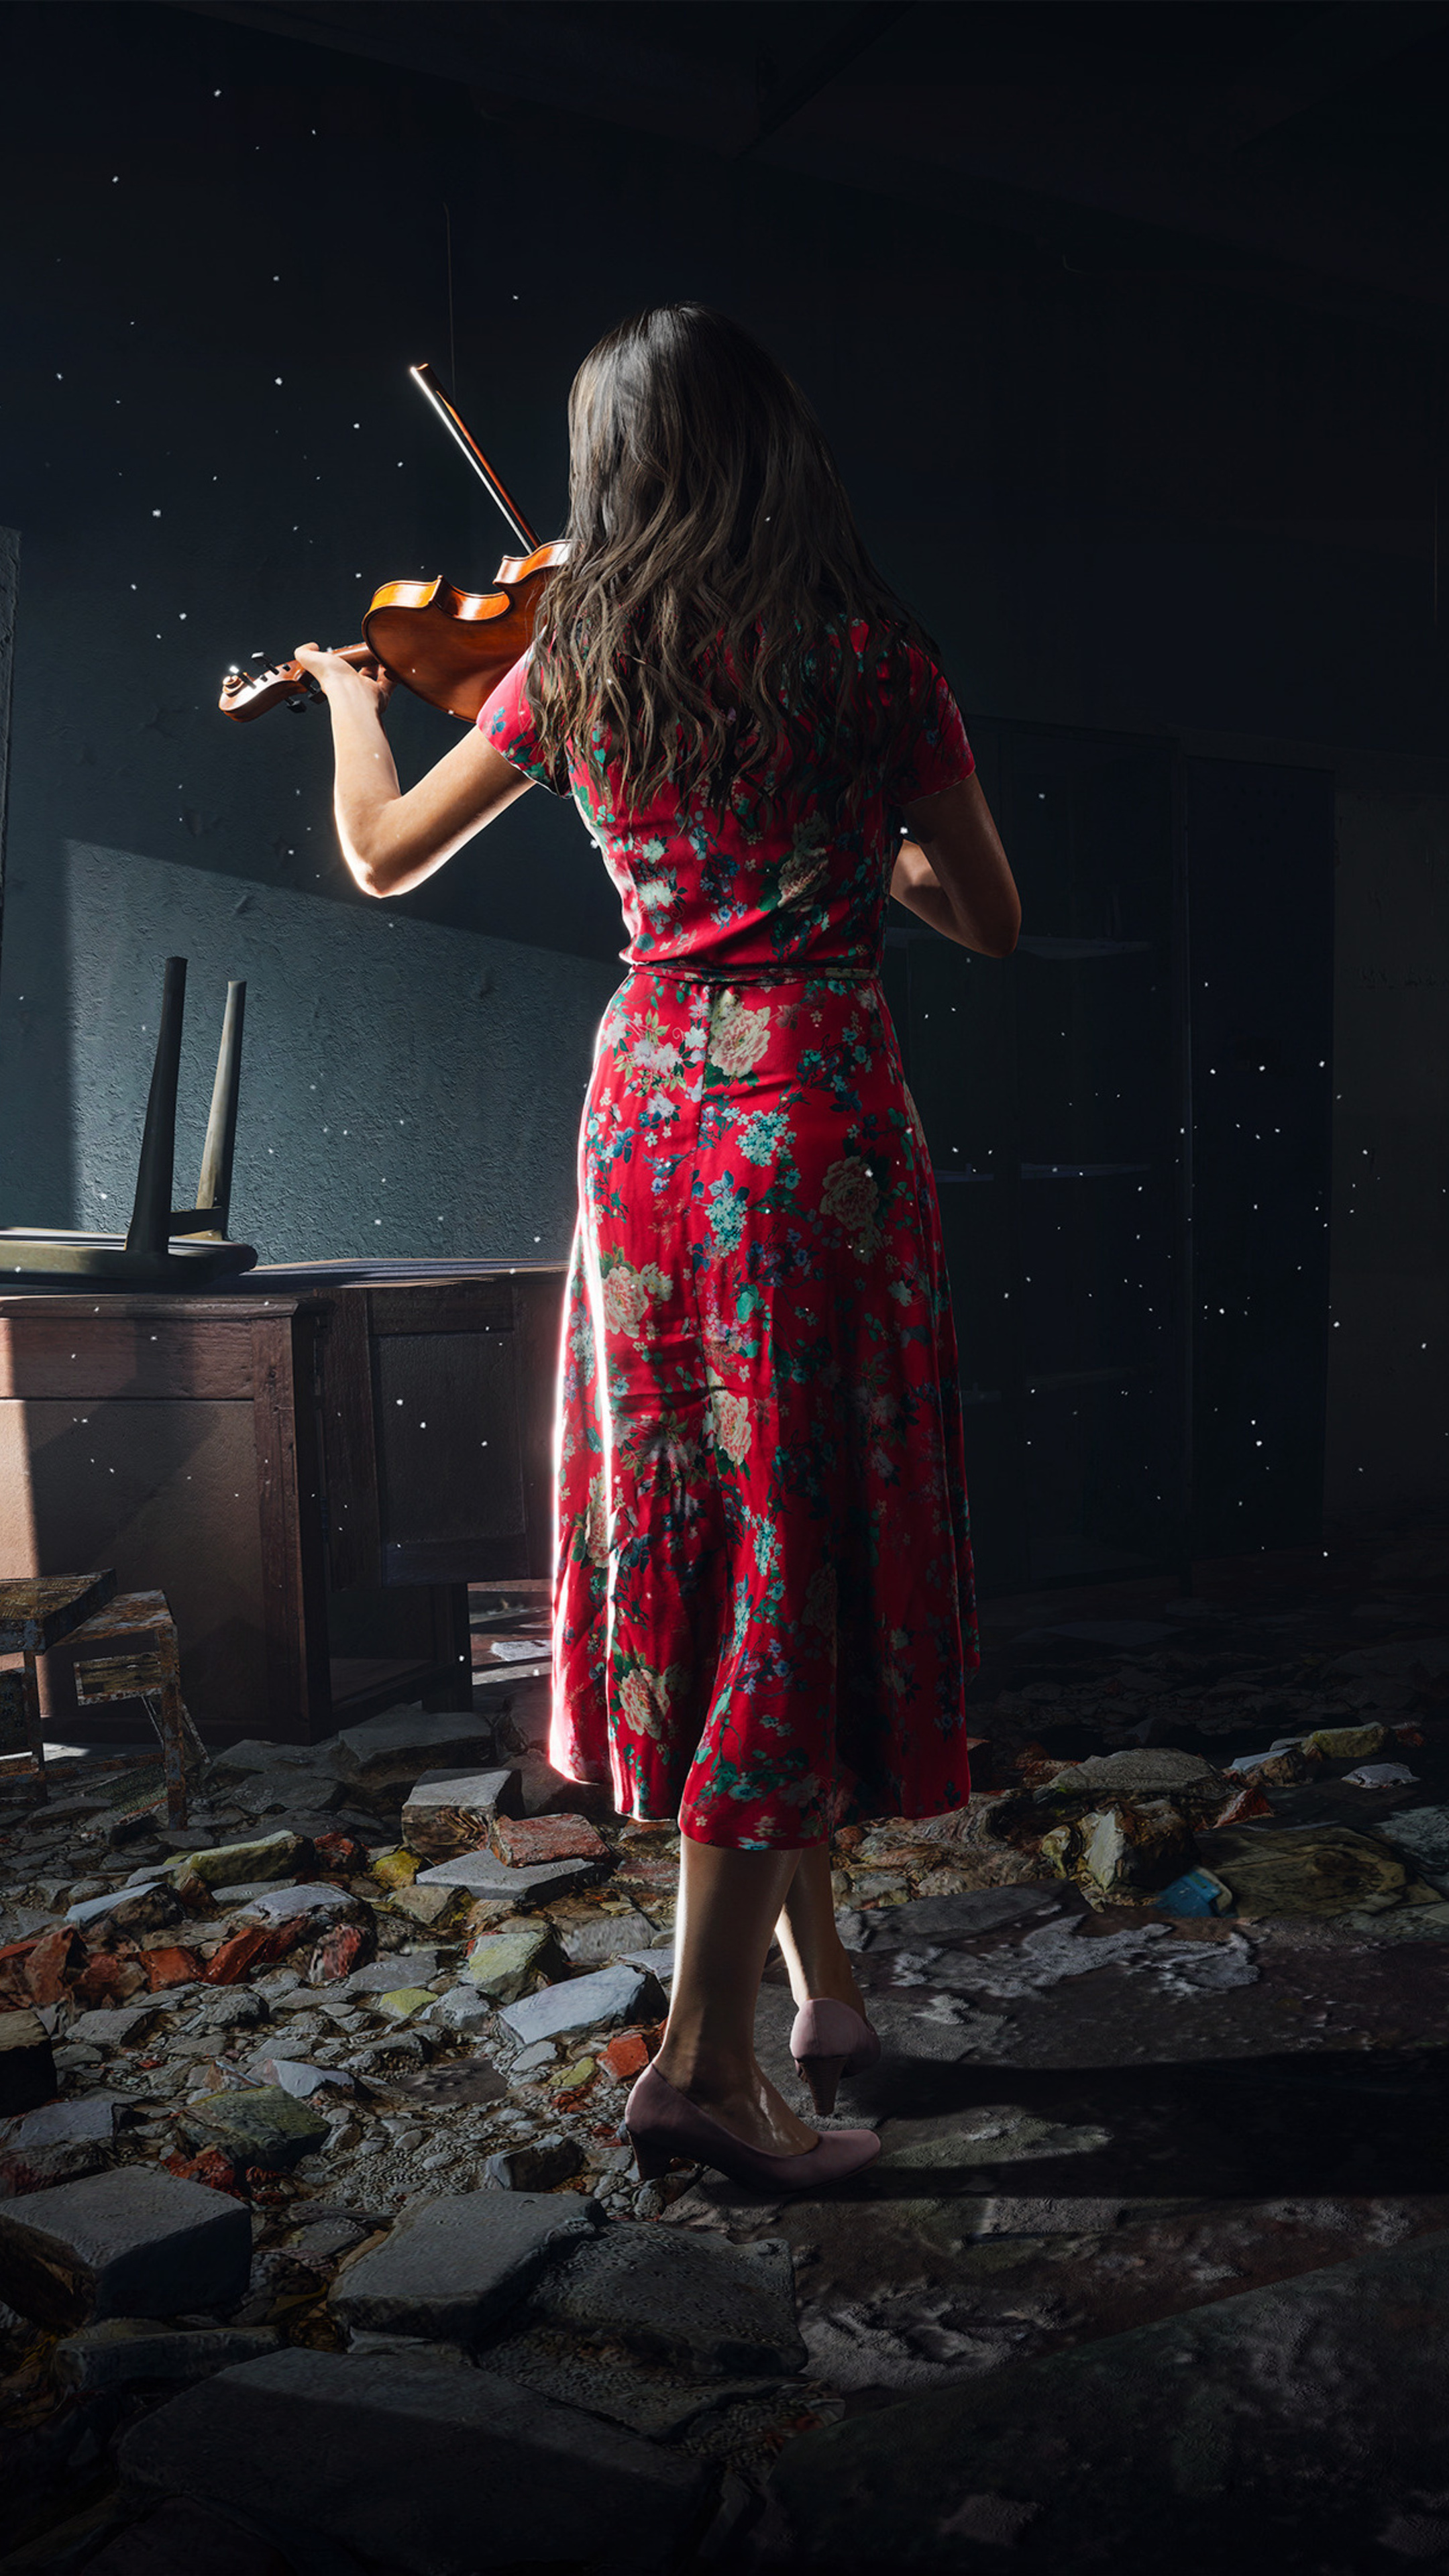 Violin: Chernobylite, Science Fiction Survival Video Game, Ghost Of A Musician In A Ruined House, 2021. 2160x3840 4K Background.